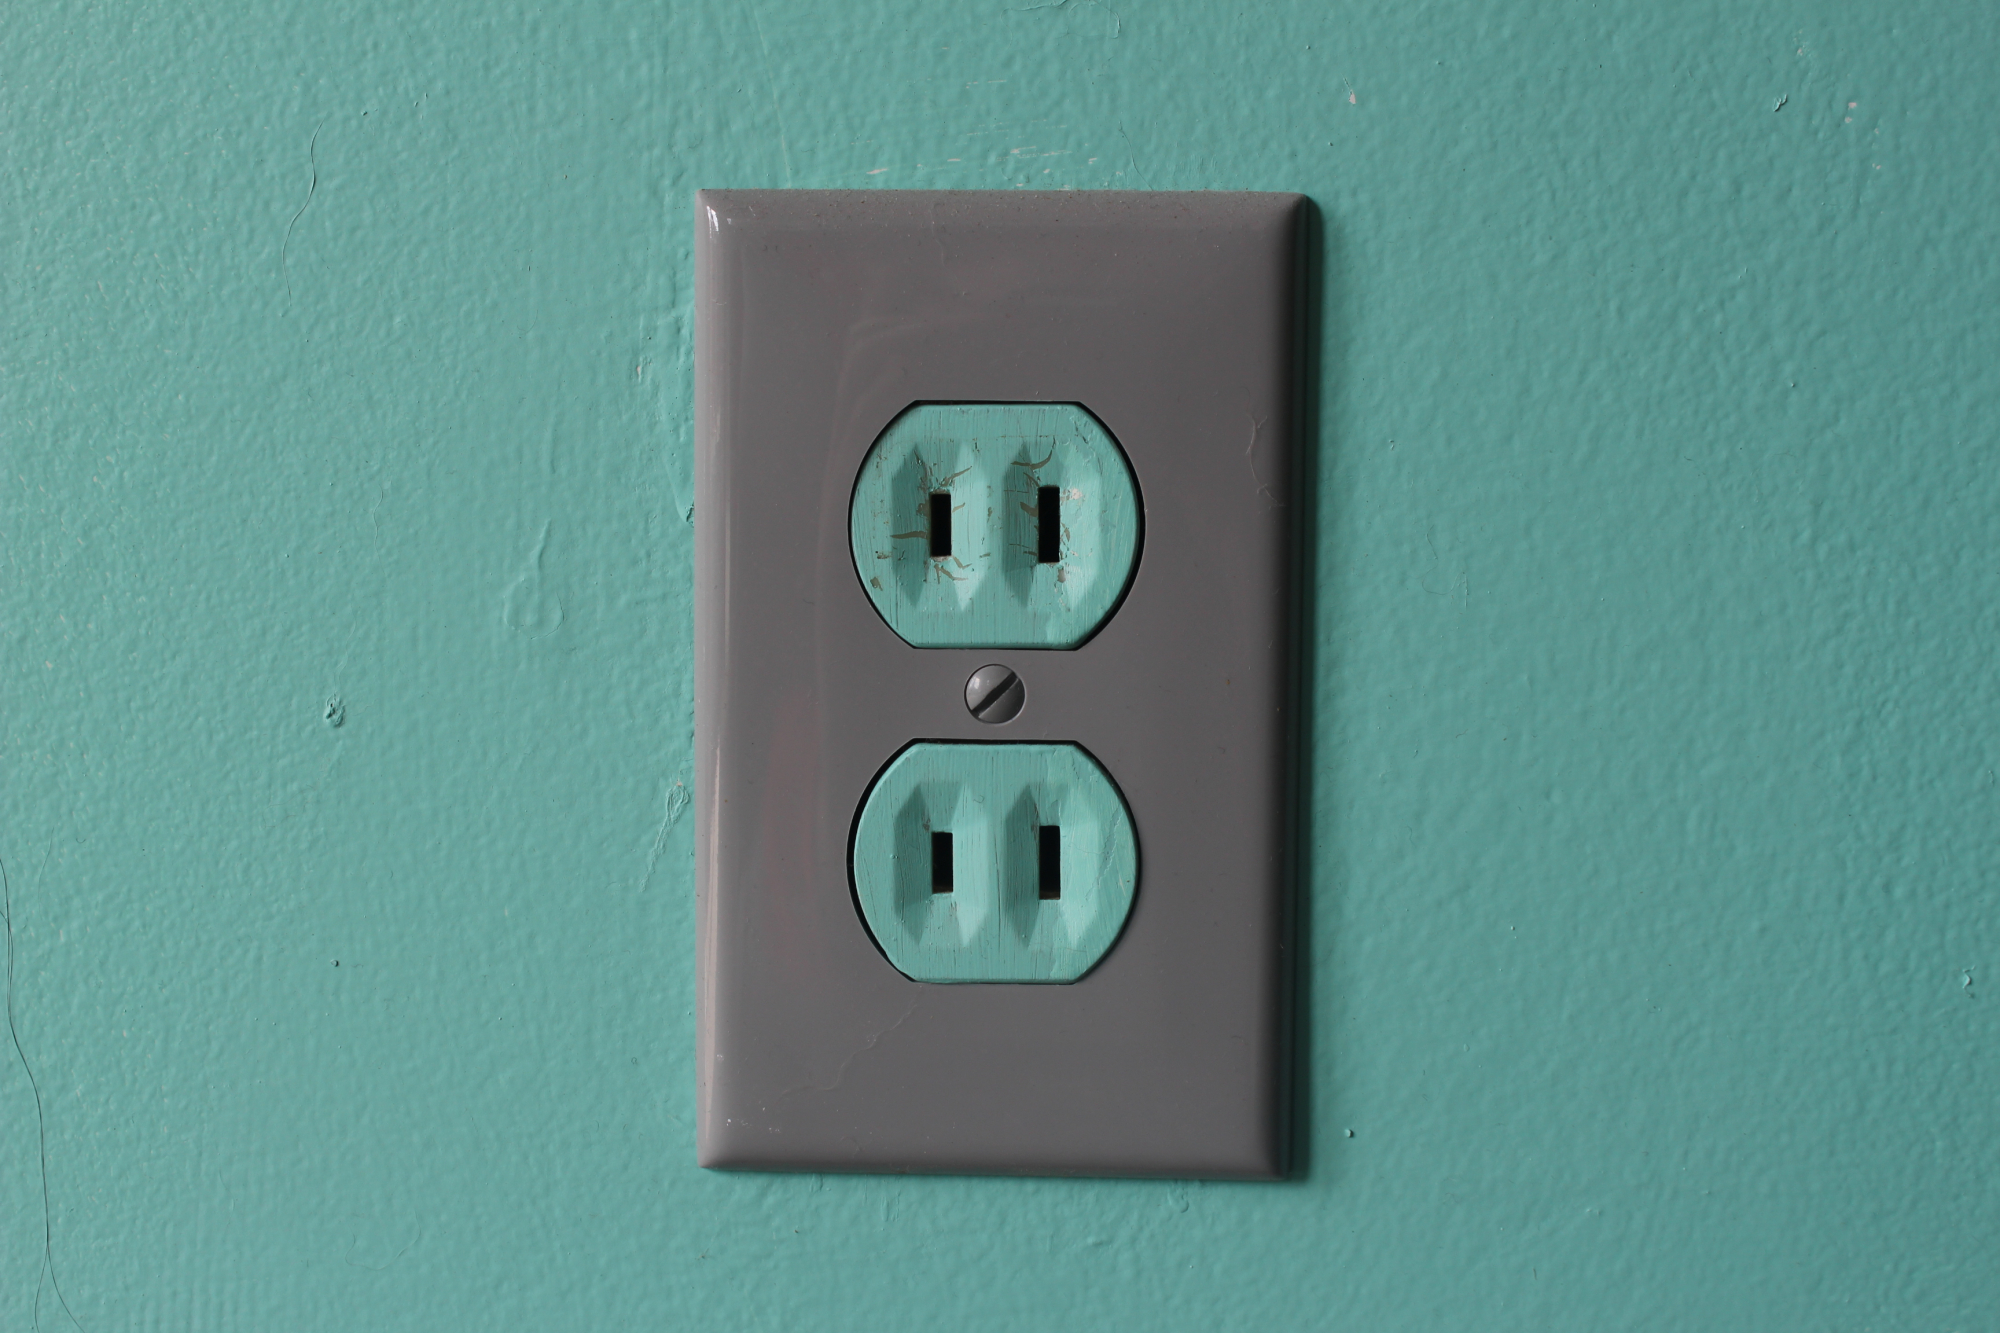 ungrounded, two-prong outlet